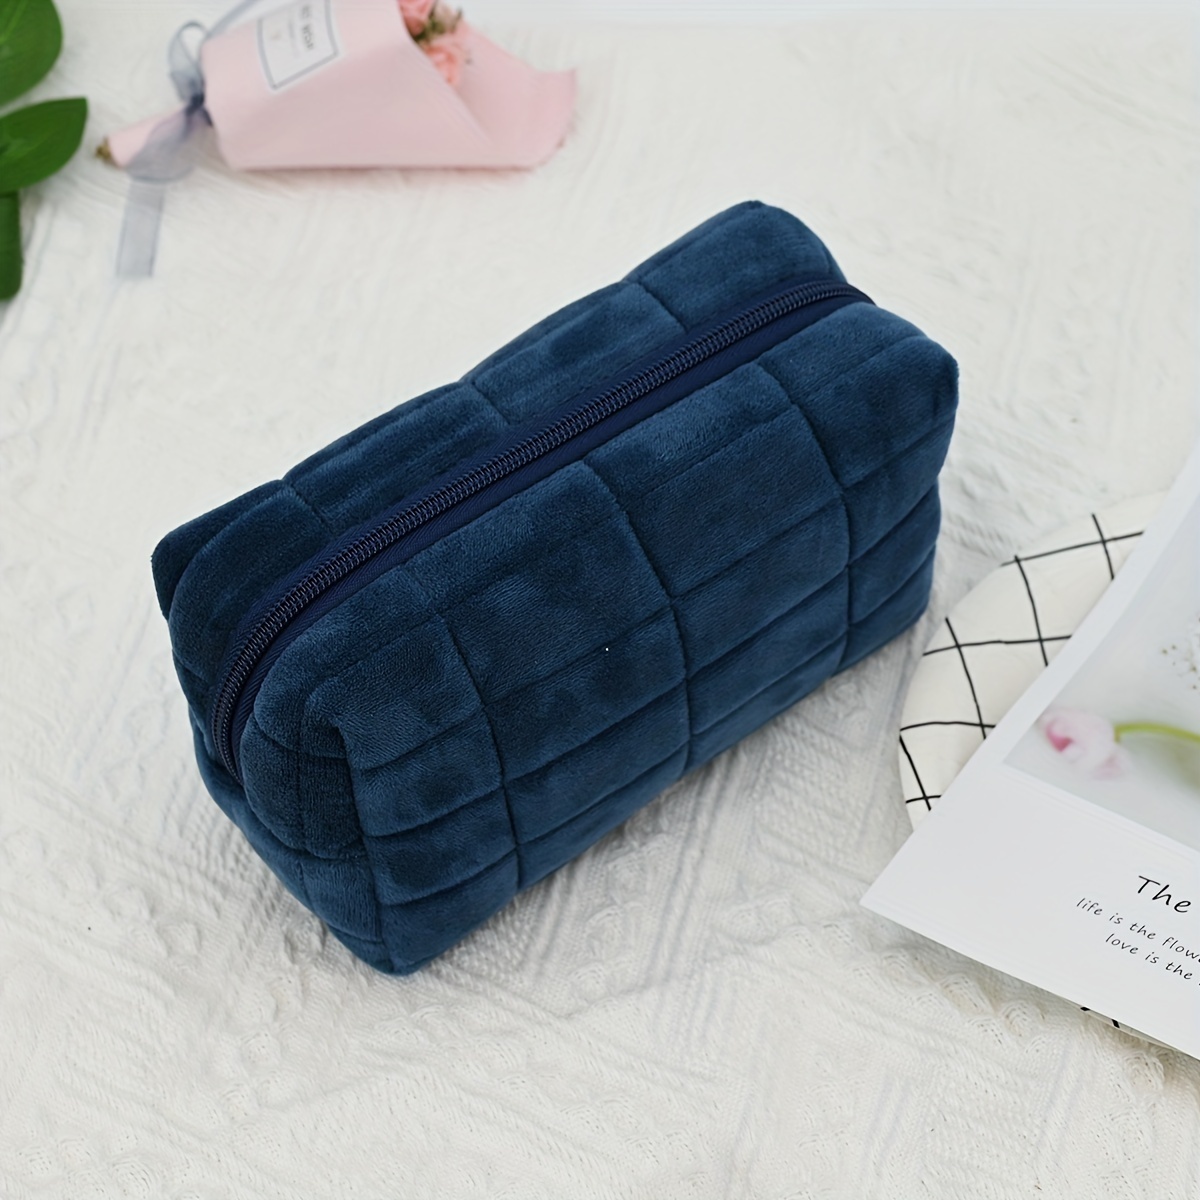 Velvet Cosmetic Bag Small Travel Makeup Pouch - Buy Cosmetic Pouch,Small  Makeup Bag,Velvet Cosmetic Bag Product on